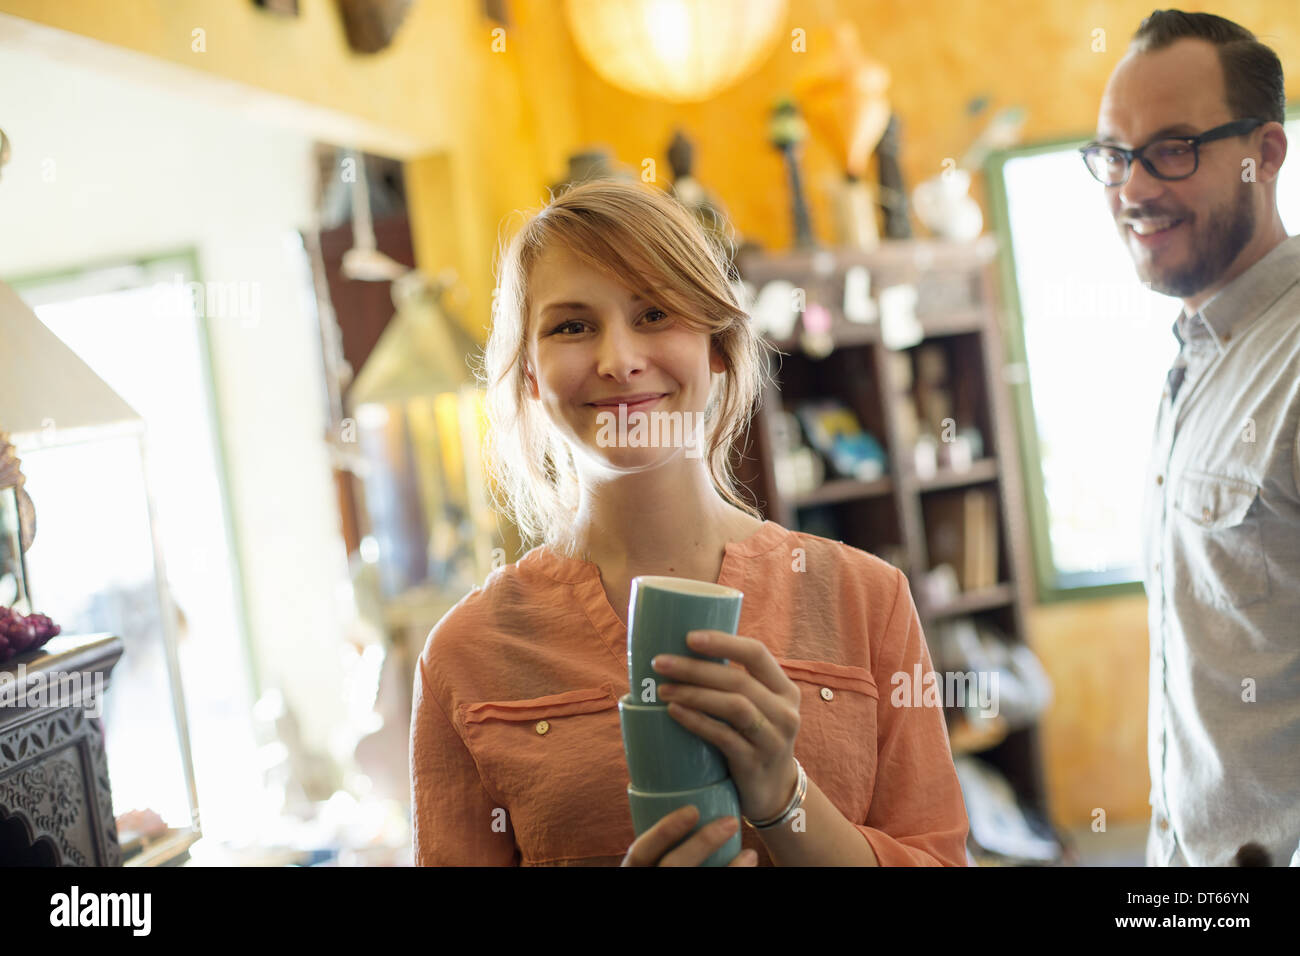 A man and woman, a couple running a business. An antique store. Stock Photo